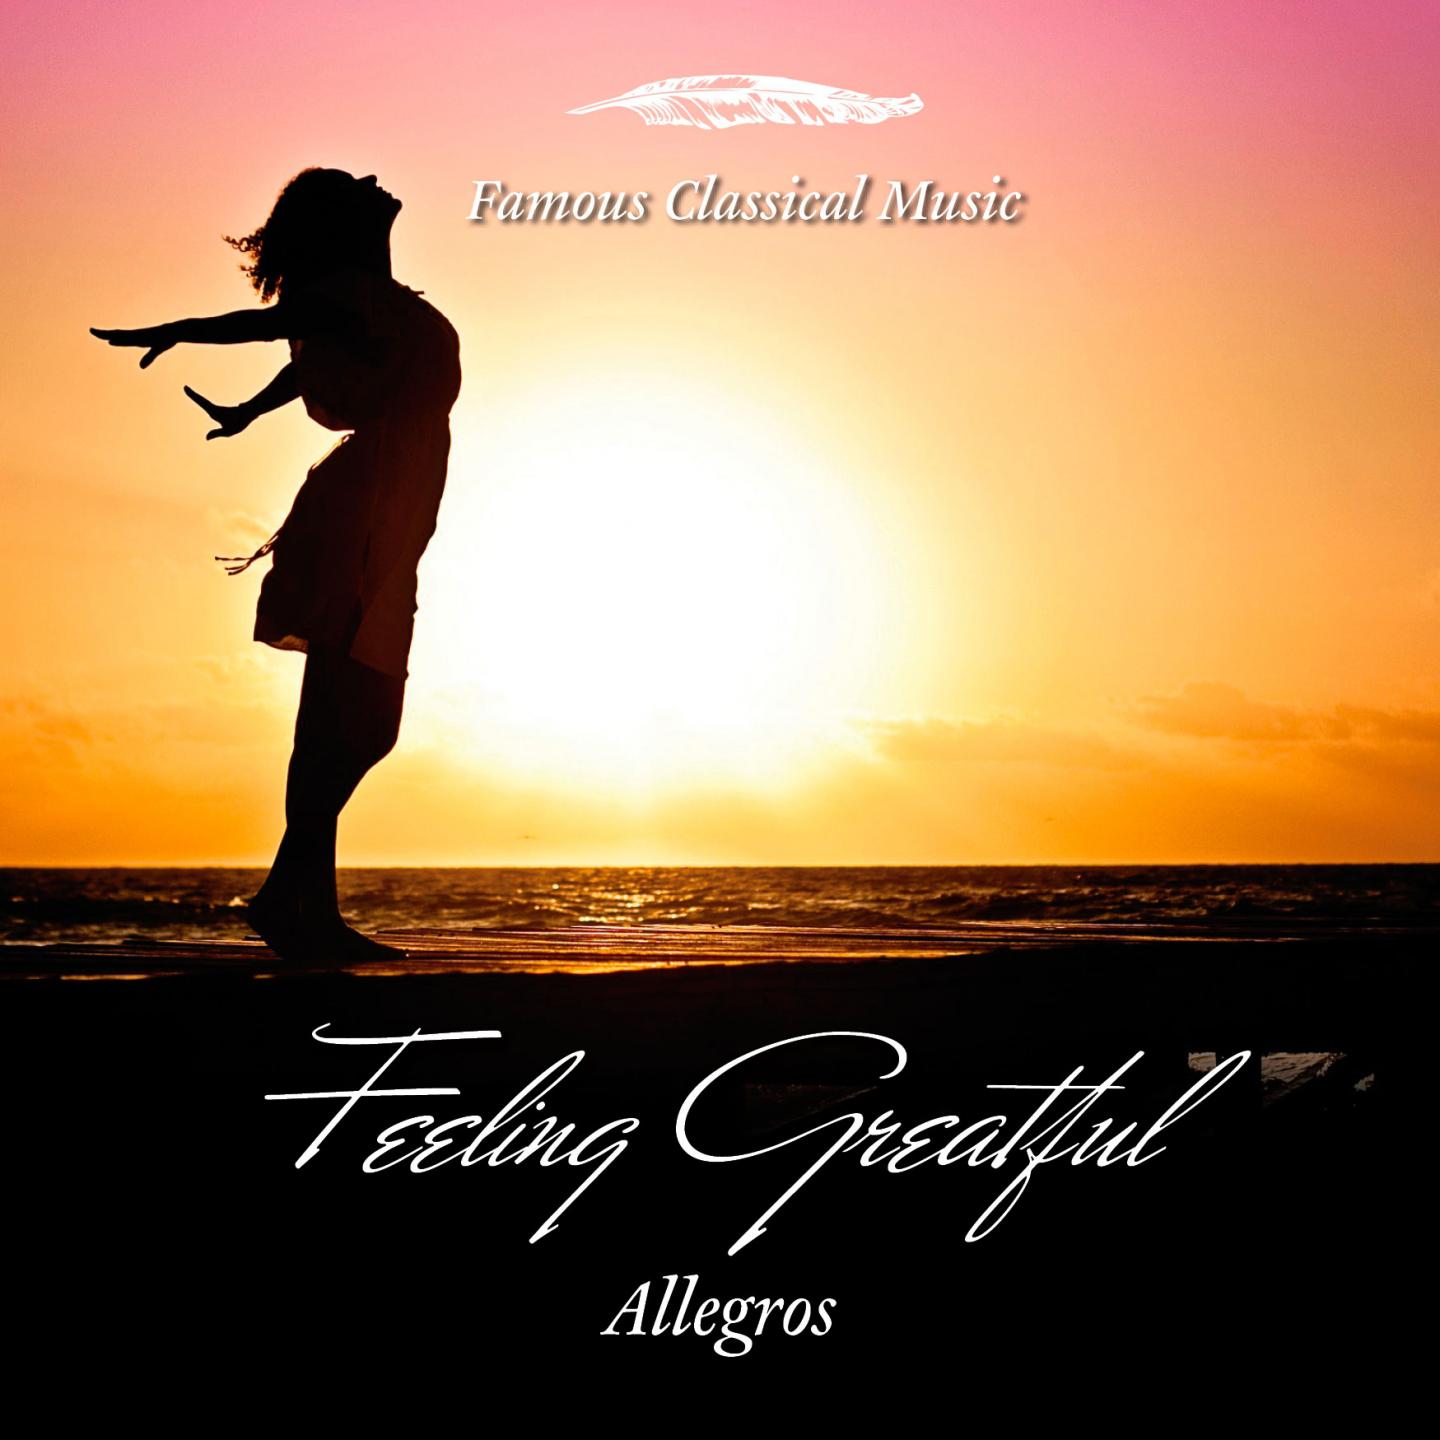 Feeling Greatful / Allegros (Famous Classical Music)